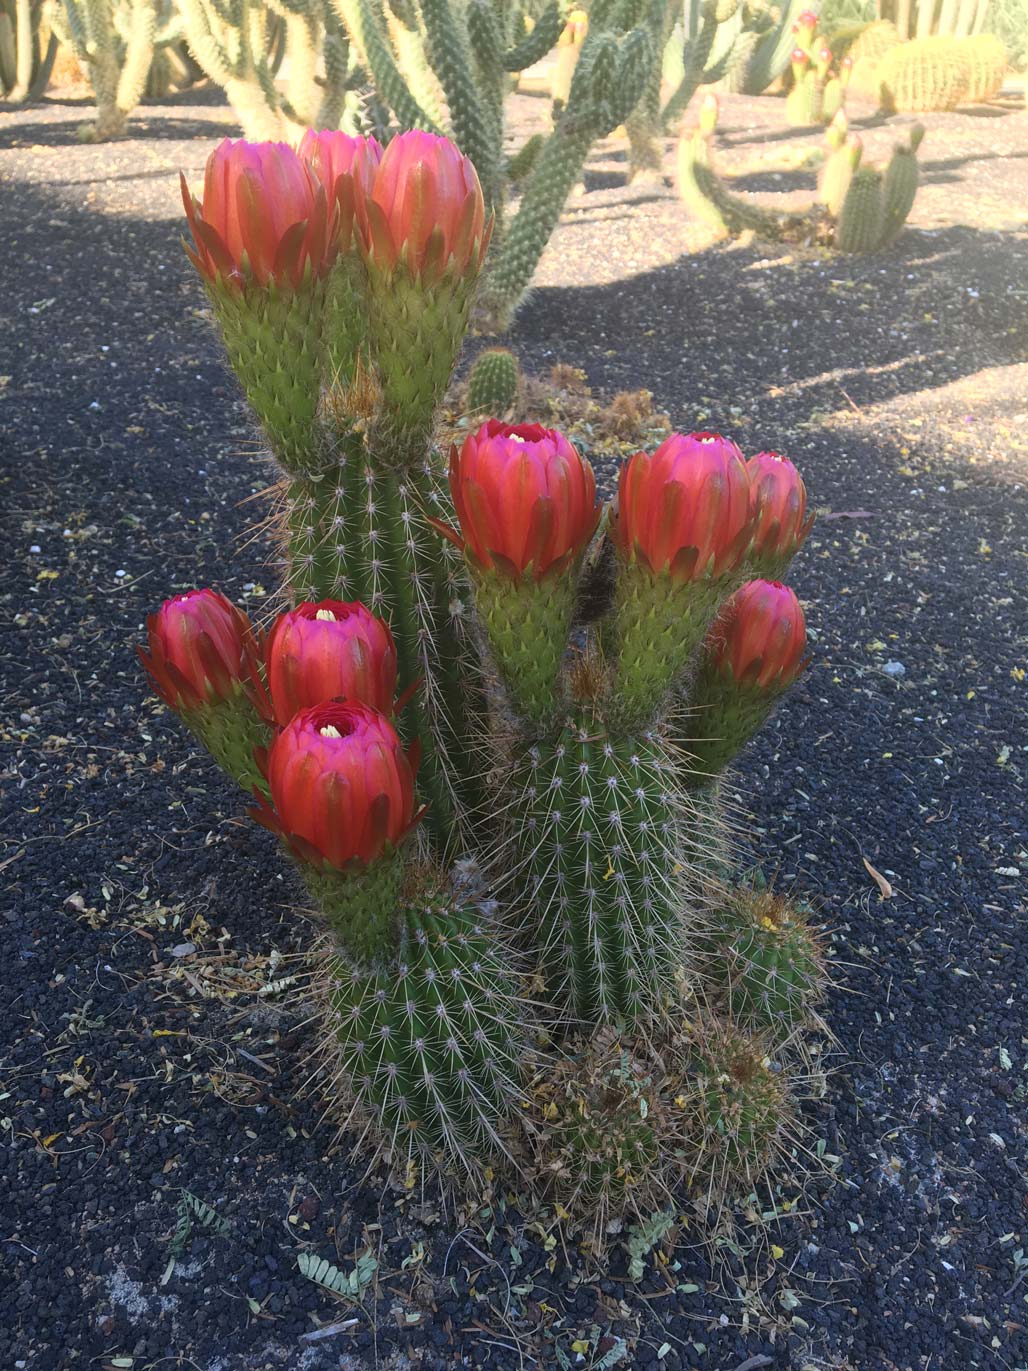 Multiple pink Torch Cactus flower buds just opening.